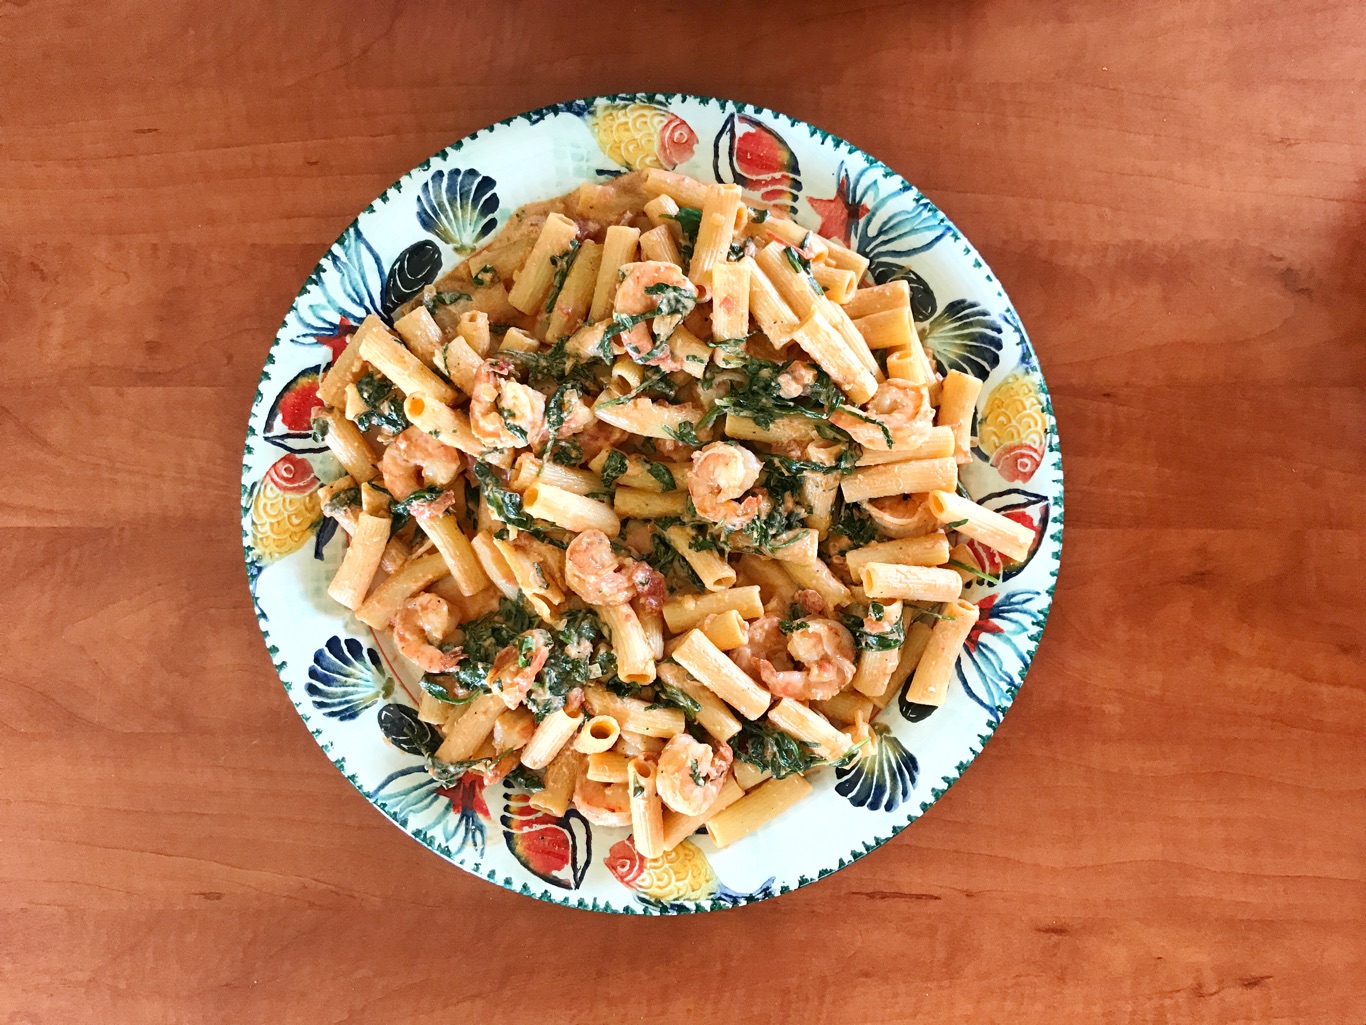 Rigatoni with Shrimps, Spinach and Creamy Yoghurt